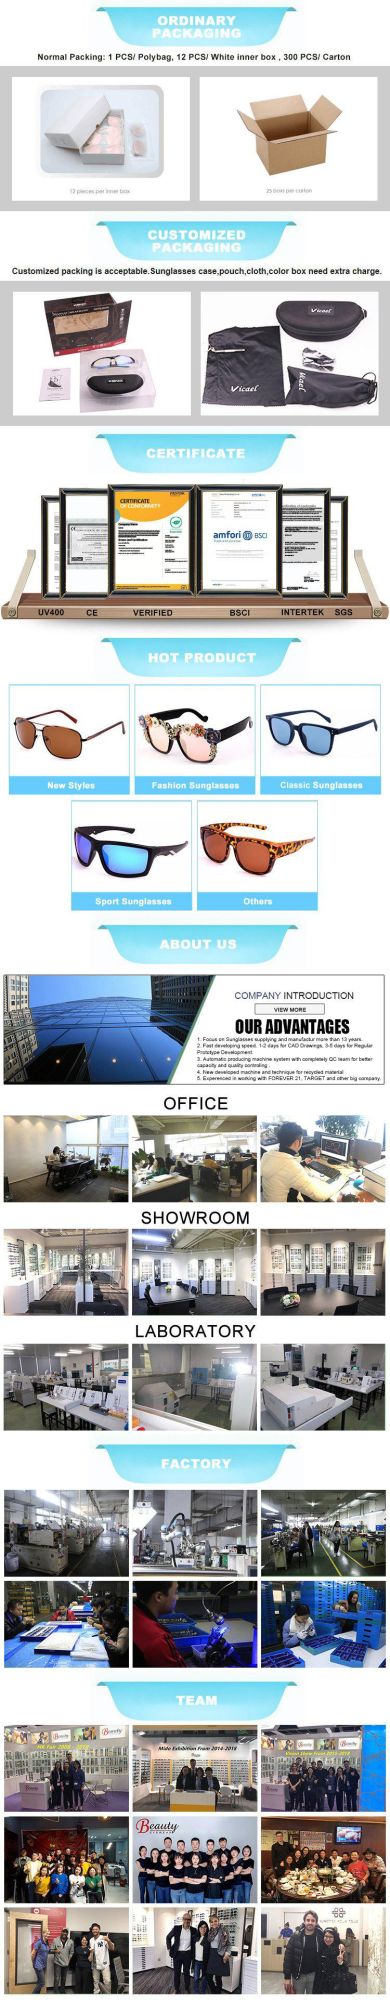 2018 Hot Selling Safety Sunglass